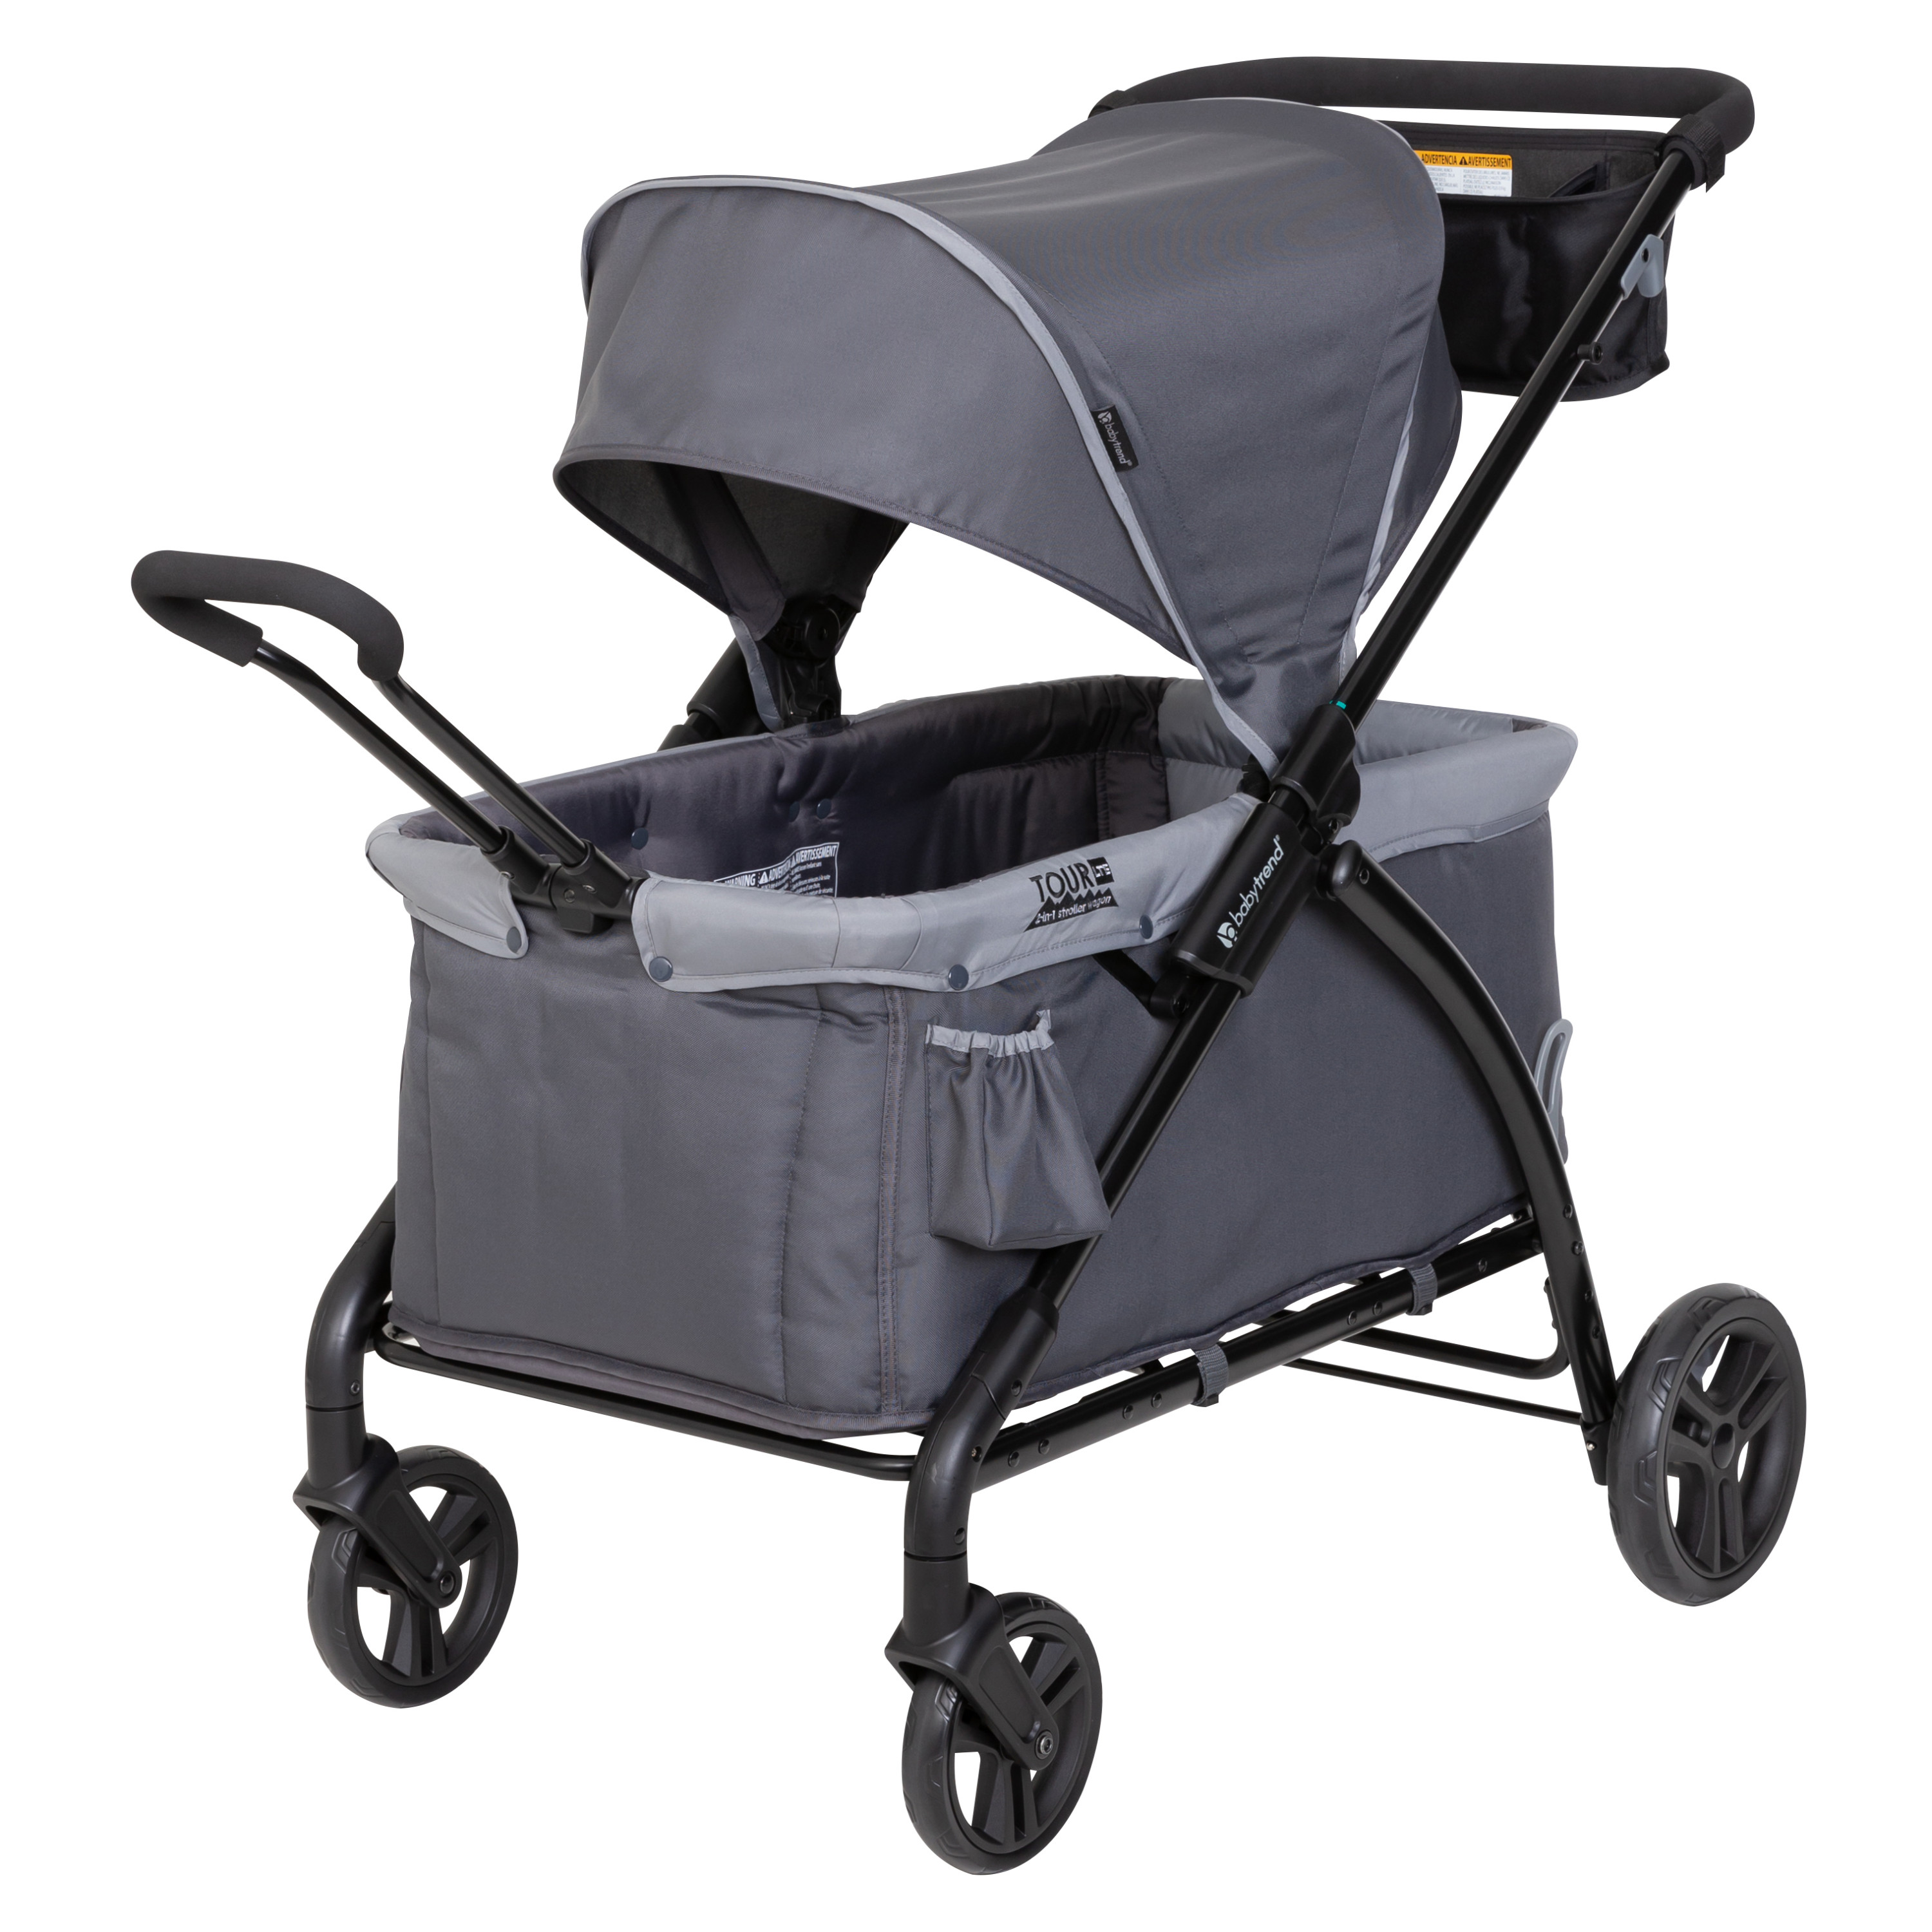 Baby Trend Tour LTE 2-in-1 Stroller Wagon - Desert Grey - image 1 of 13